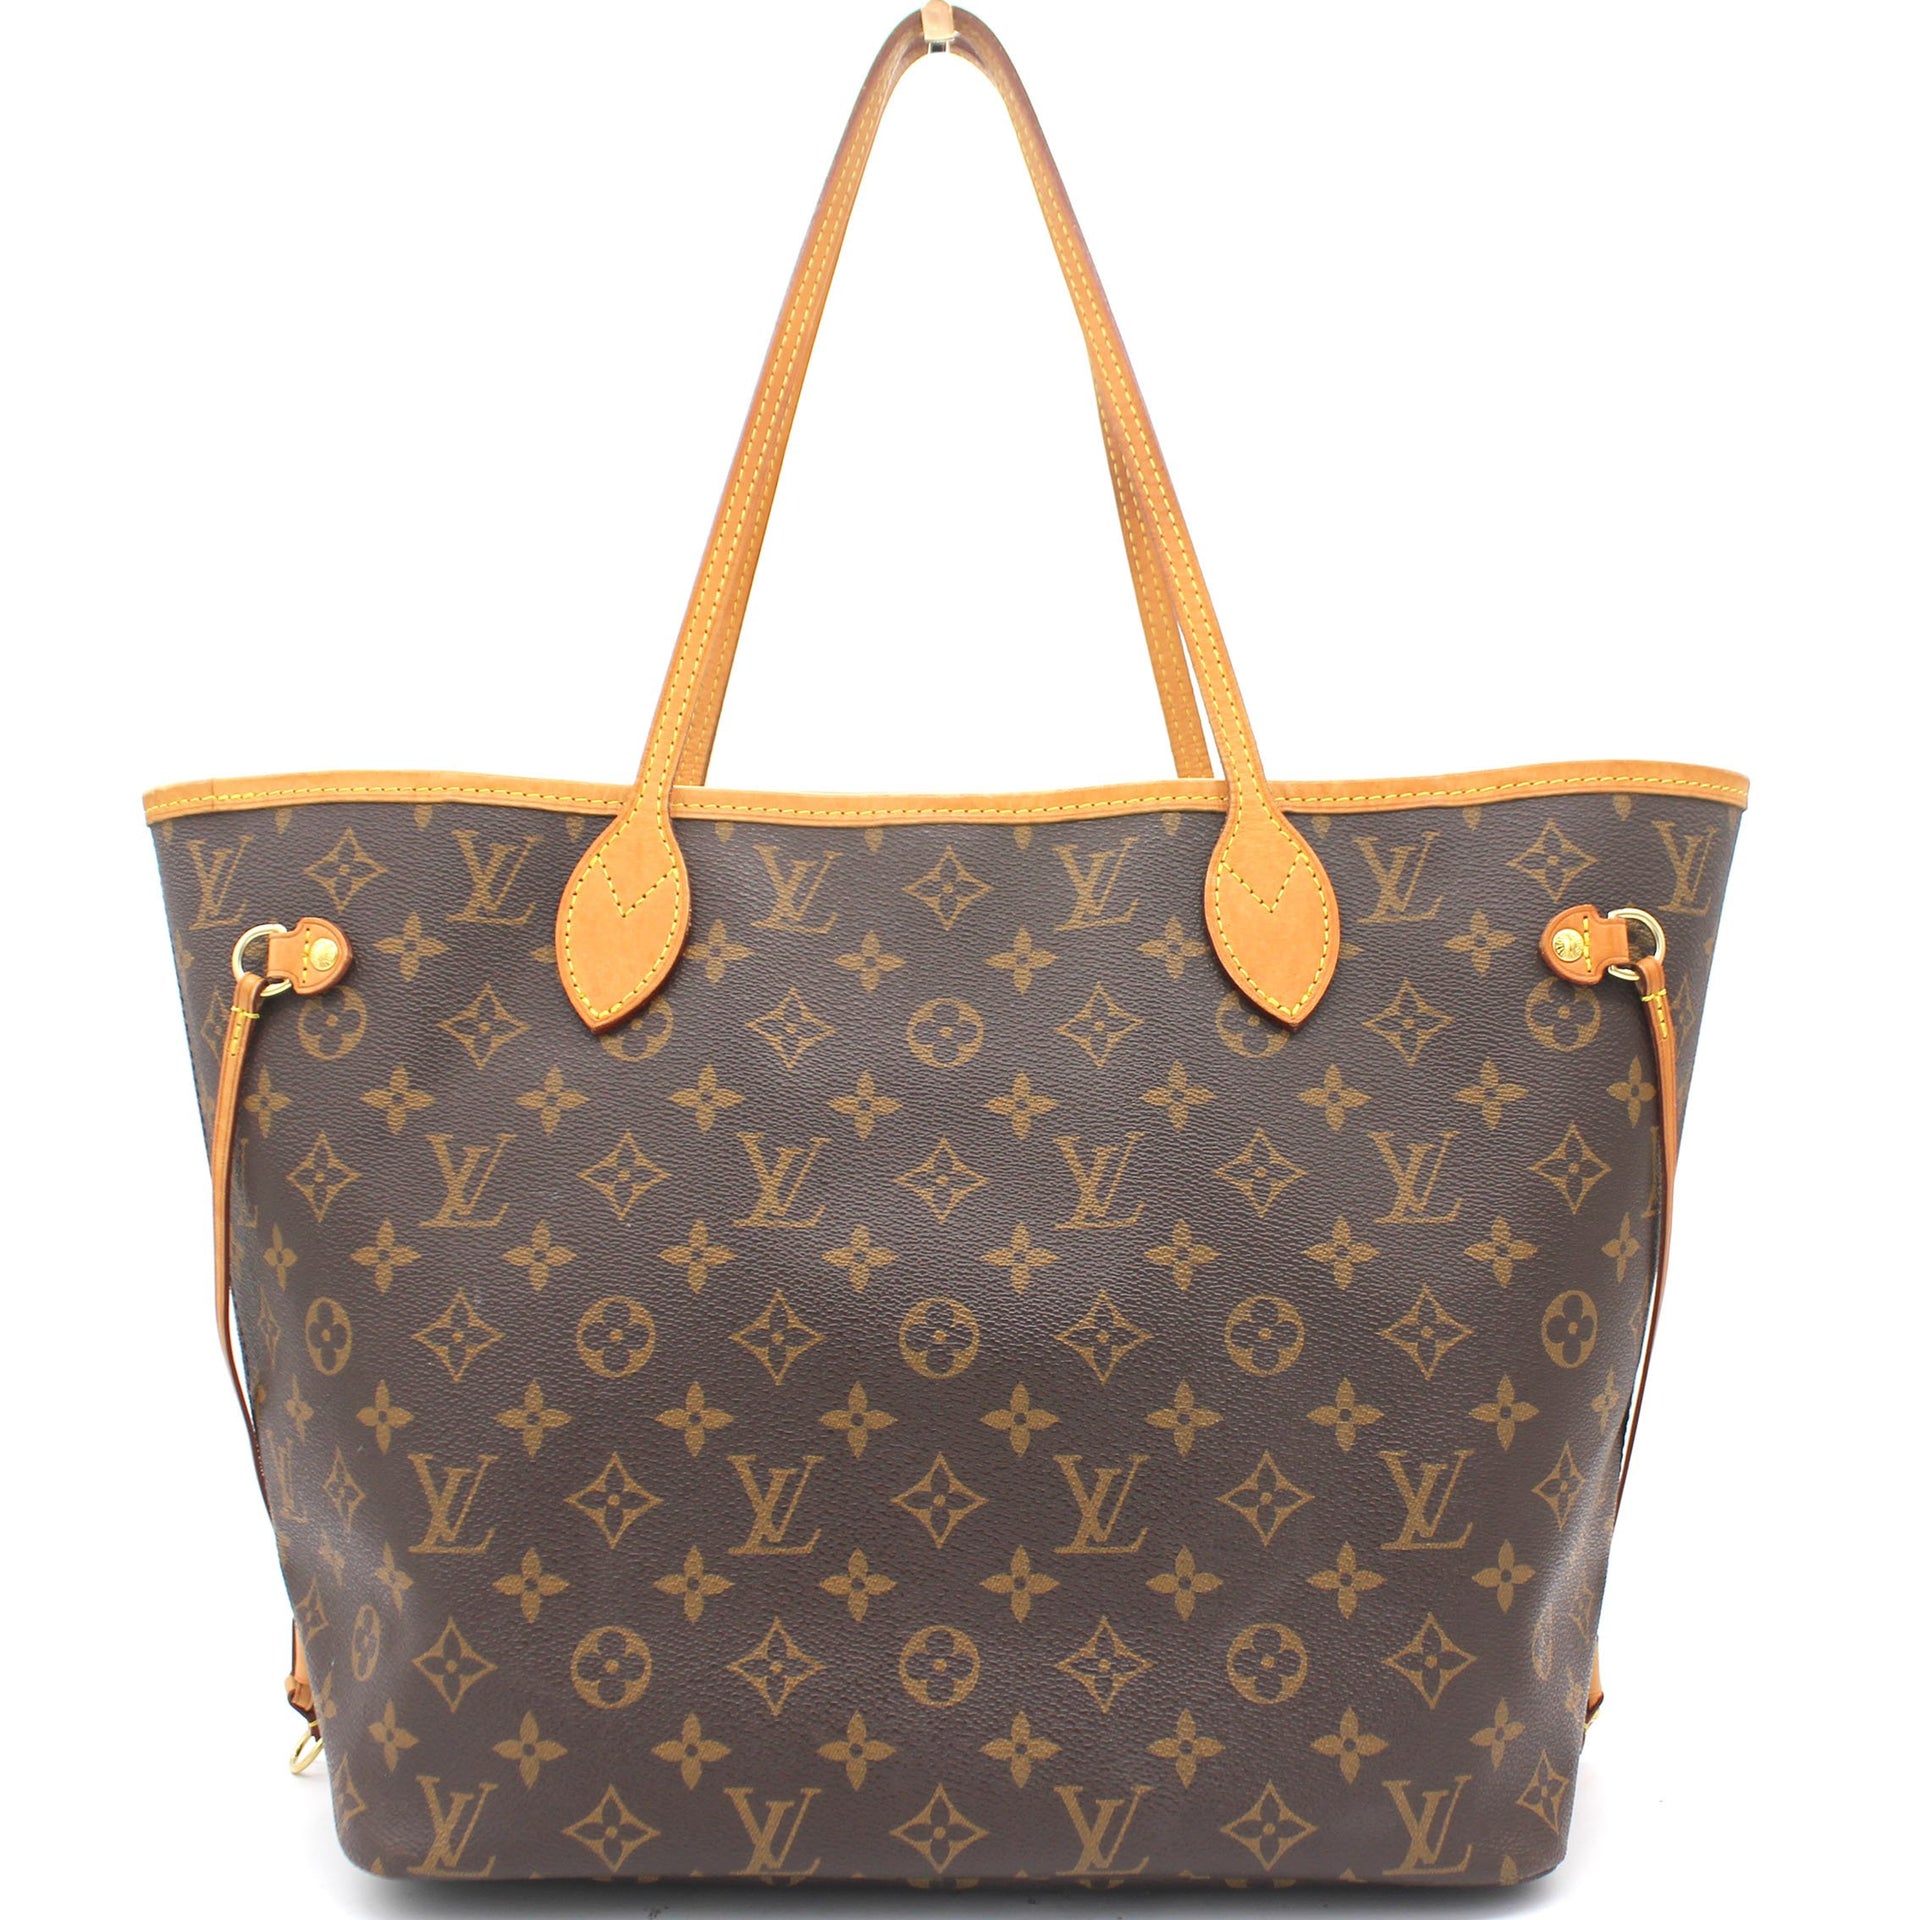 Louis Vuitton Neverfull Bag, Authenticity Guaranteed